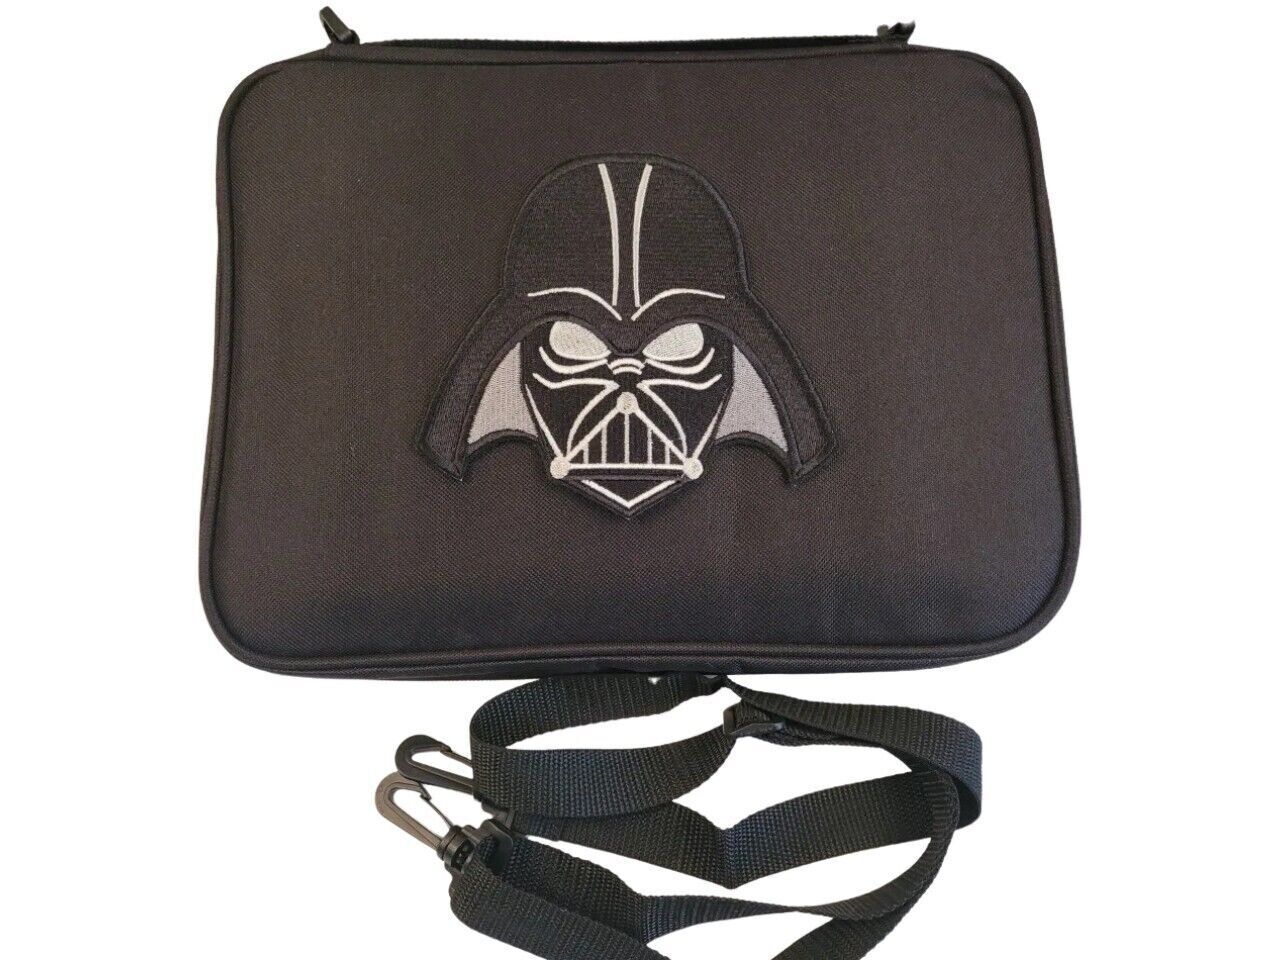 Embroidery Star Wars Darth Vader Pin Trading Book Bag for Disney Pin Collections